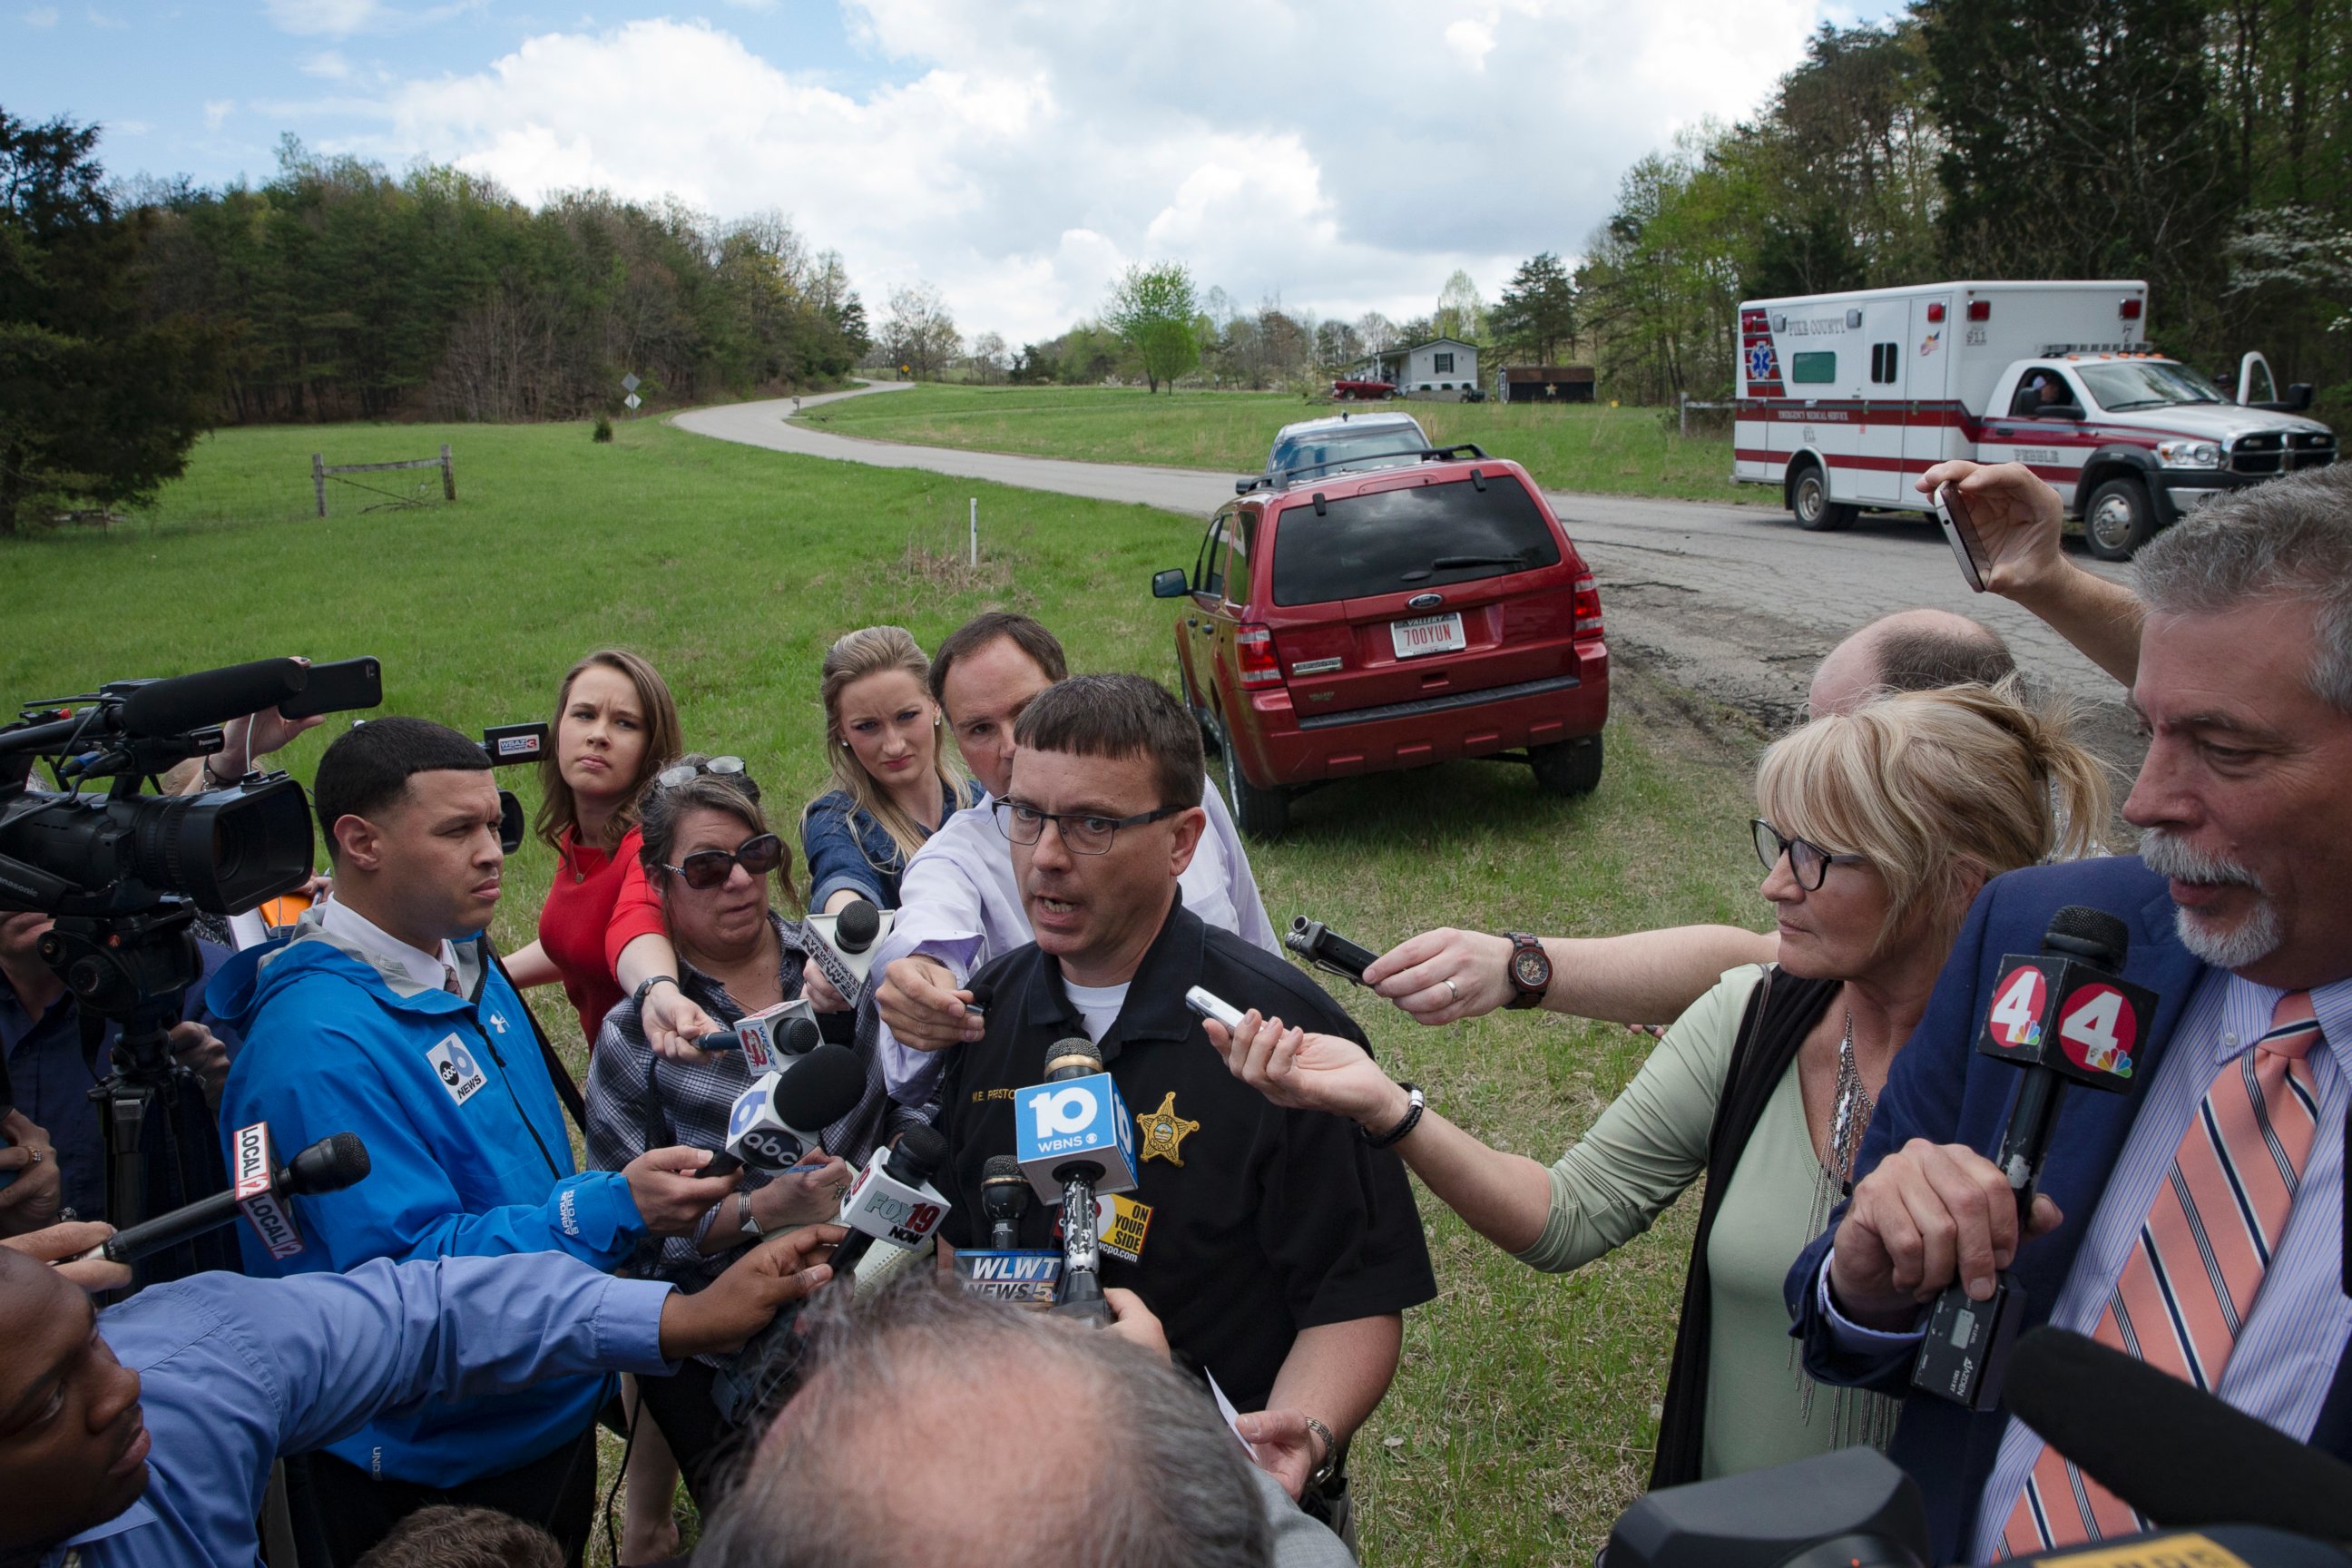 PHOTO: Lt. Michael Preston, of the Ross County Sheriff's Department speaks to the media on Union Hill Road that approaches a crime scene, Friday, April 22, 2016, in Pike County, Ohio. Shootings with multiple fatalities were reported at this location.